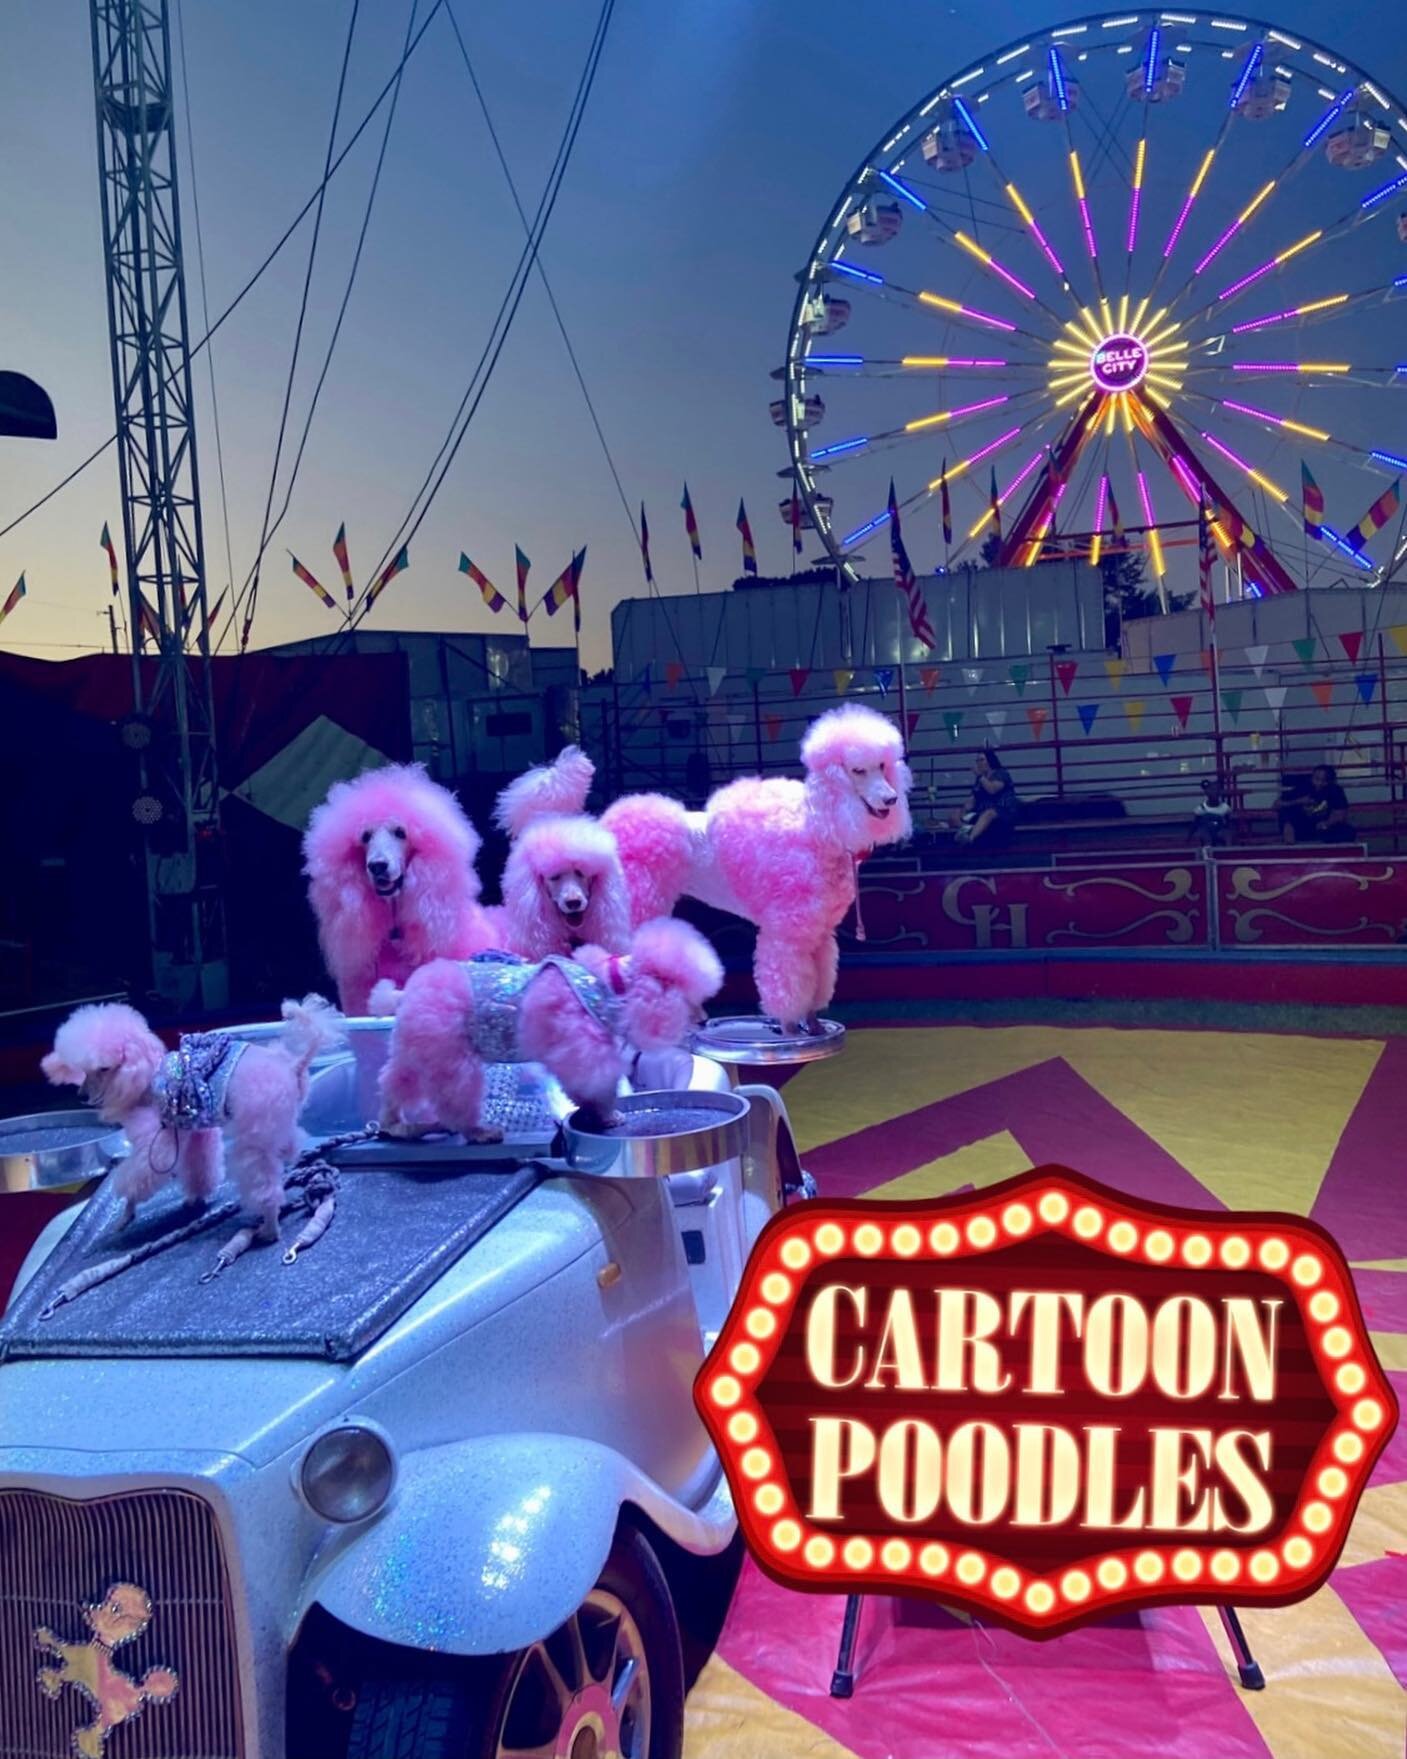 These poodles had a blast performing at the Alabama State Fair